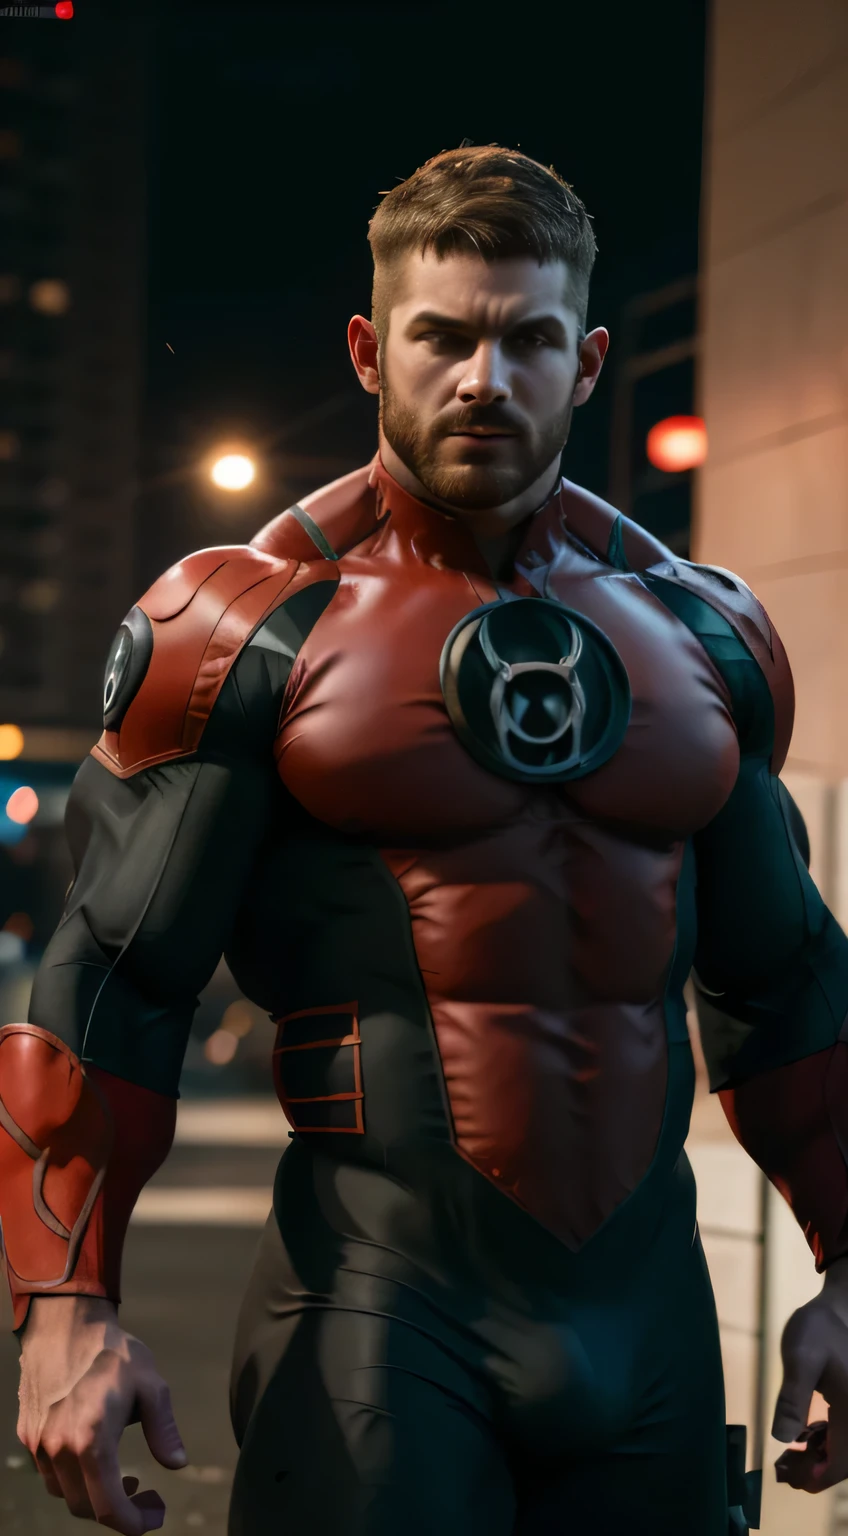 An award-winning original photo，A wild muscular man, (30 years old daddy:1.3), 1boy, Solo, (wearing a (red lantern) metal suit), hazel hair, (big shoulder), muscular, stubbles, Short beard, (Detailed face:1.3), (beautiful eyes:1.2), really rage, Dynamic Angle, volumetric lighting, (Best quality, A high resolution, Photorealistic), Cinematic lighting, Masterpiece, RAW photo, Intricate details, hdr, depth of field, upper body shot,